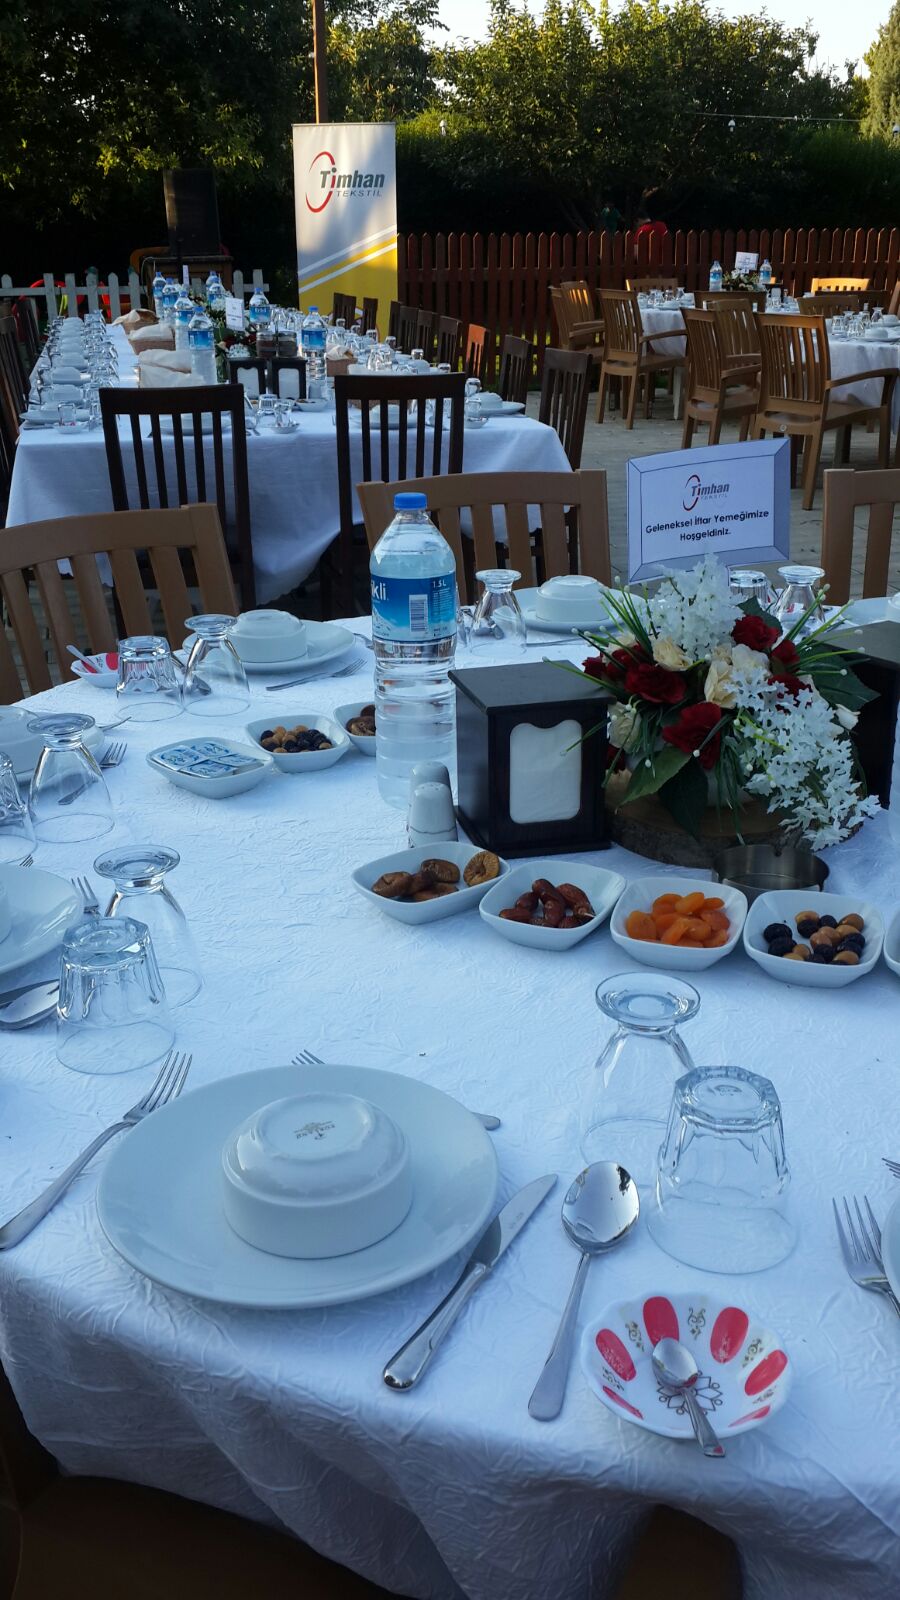 Timhan Textile is in the Traditional İftar Meal